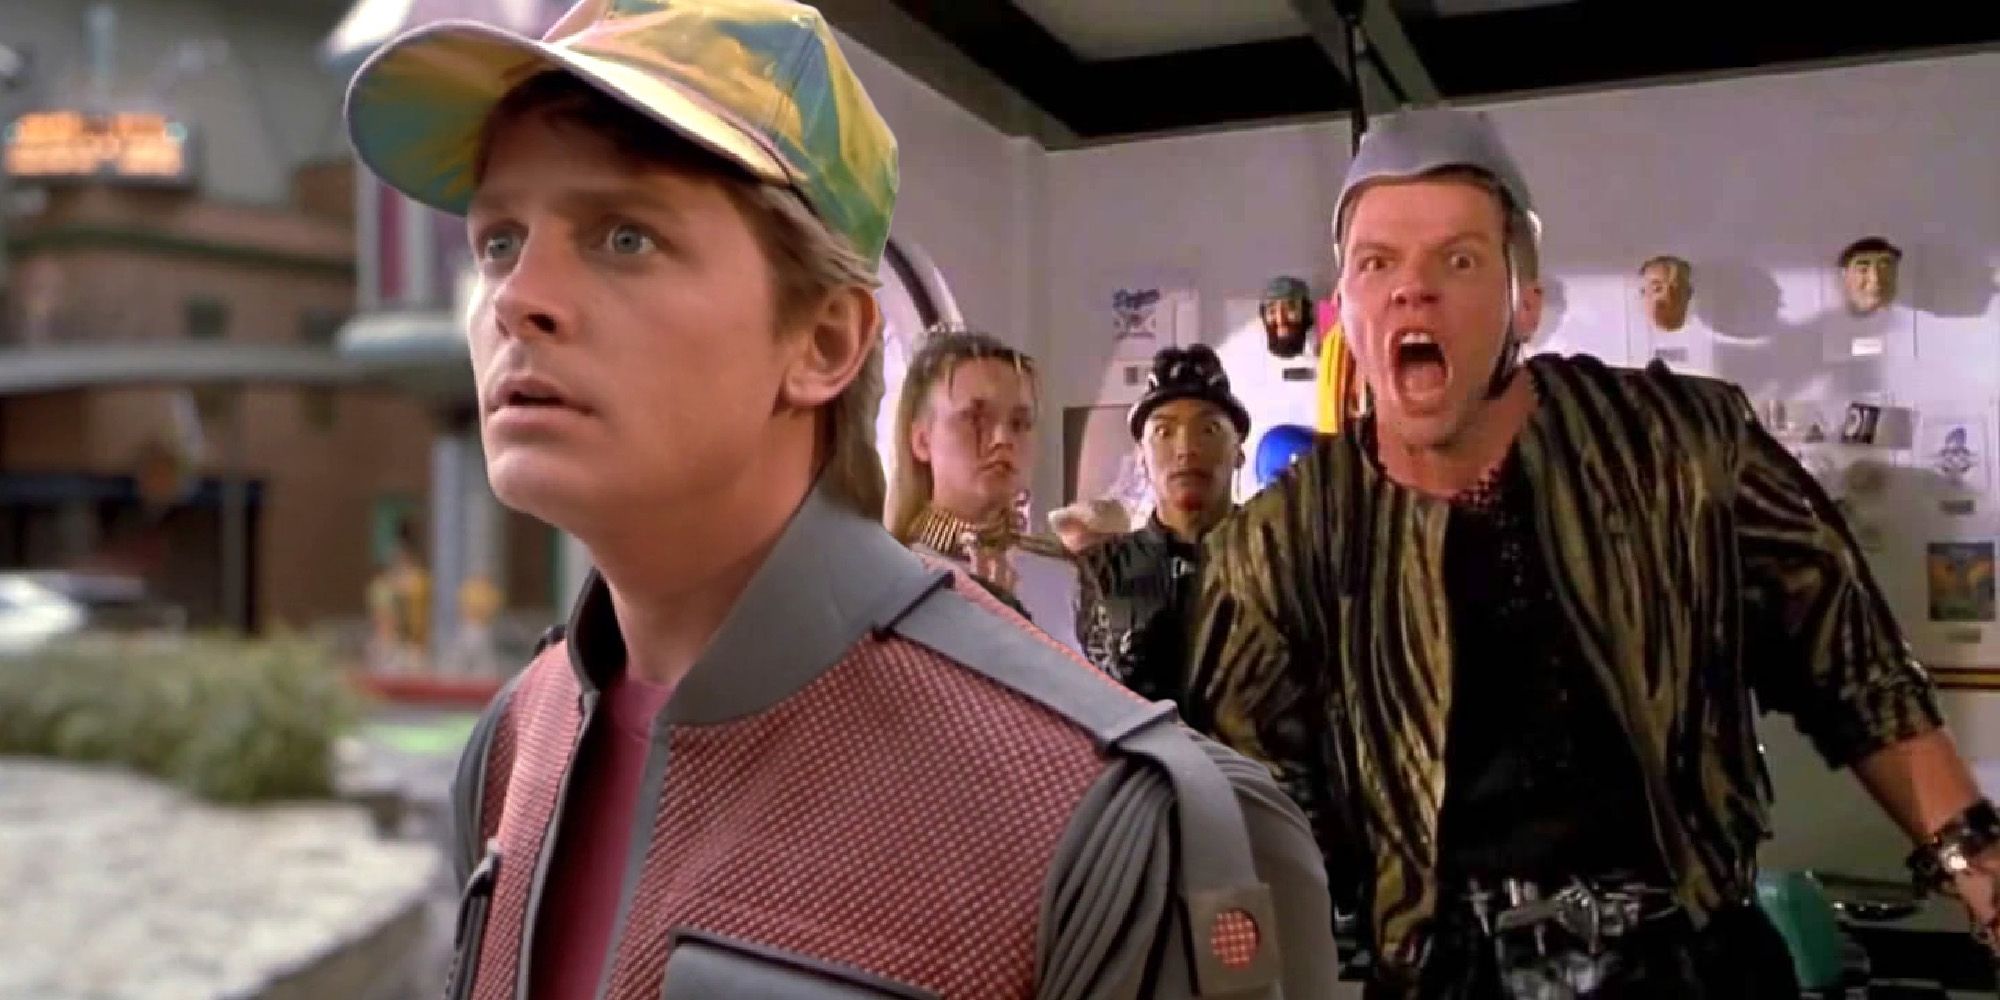 Why does the word "chicken" really upset Marty McFly in the. 